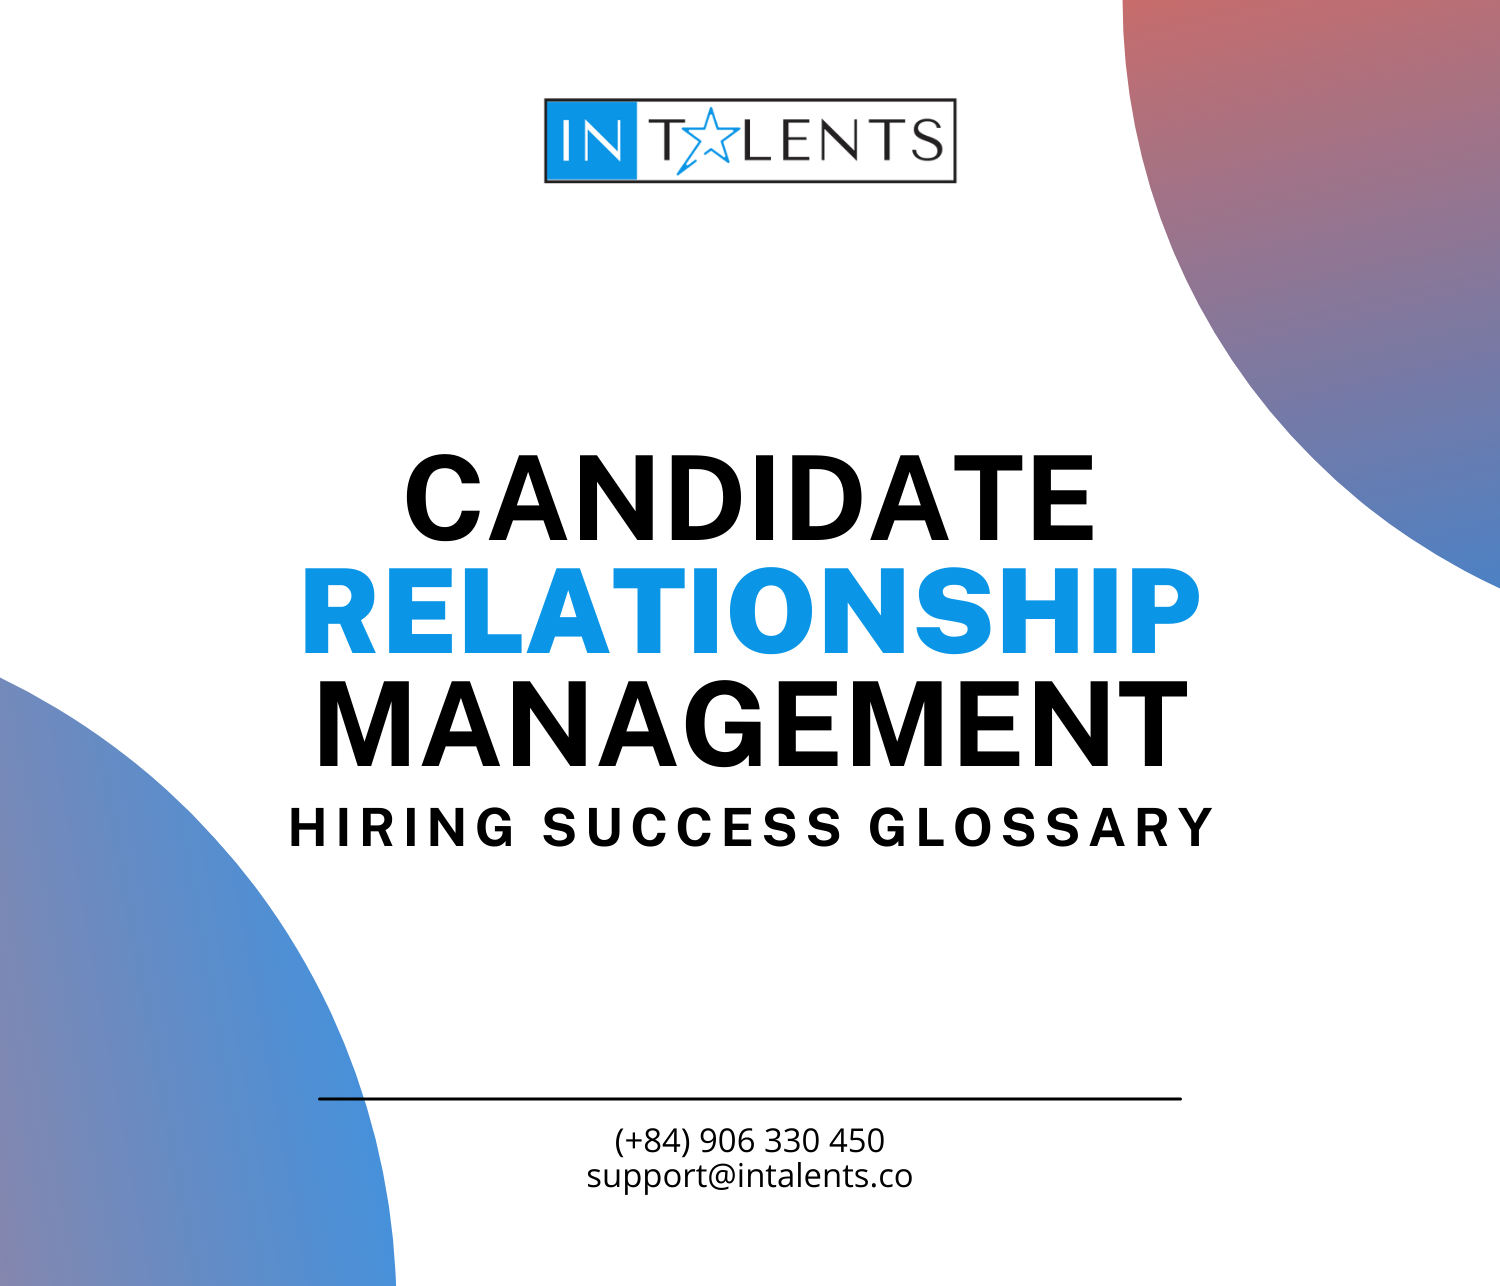 intalents-candidate-relationship-management-cover